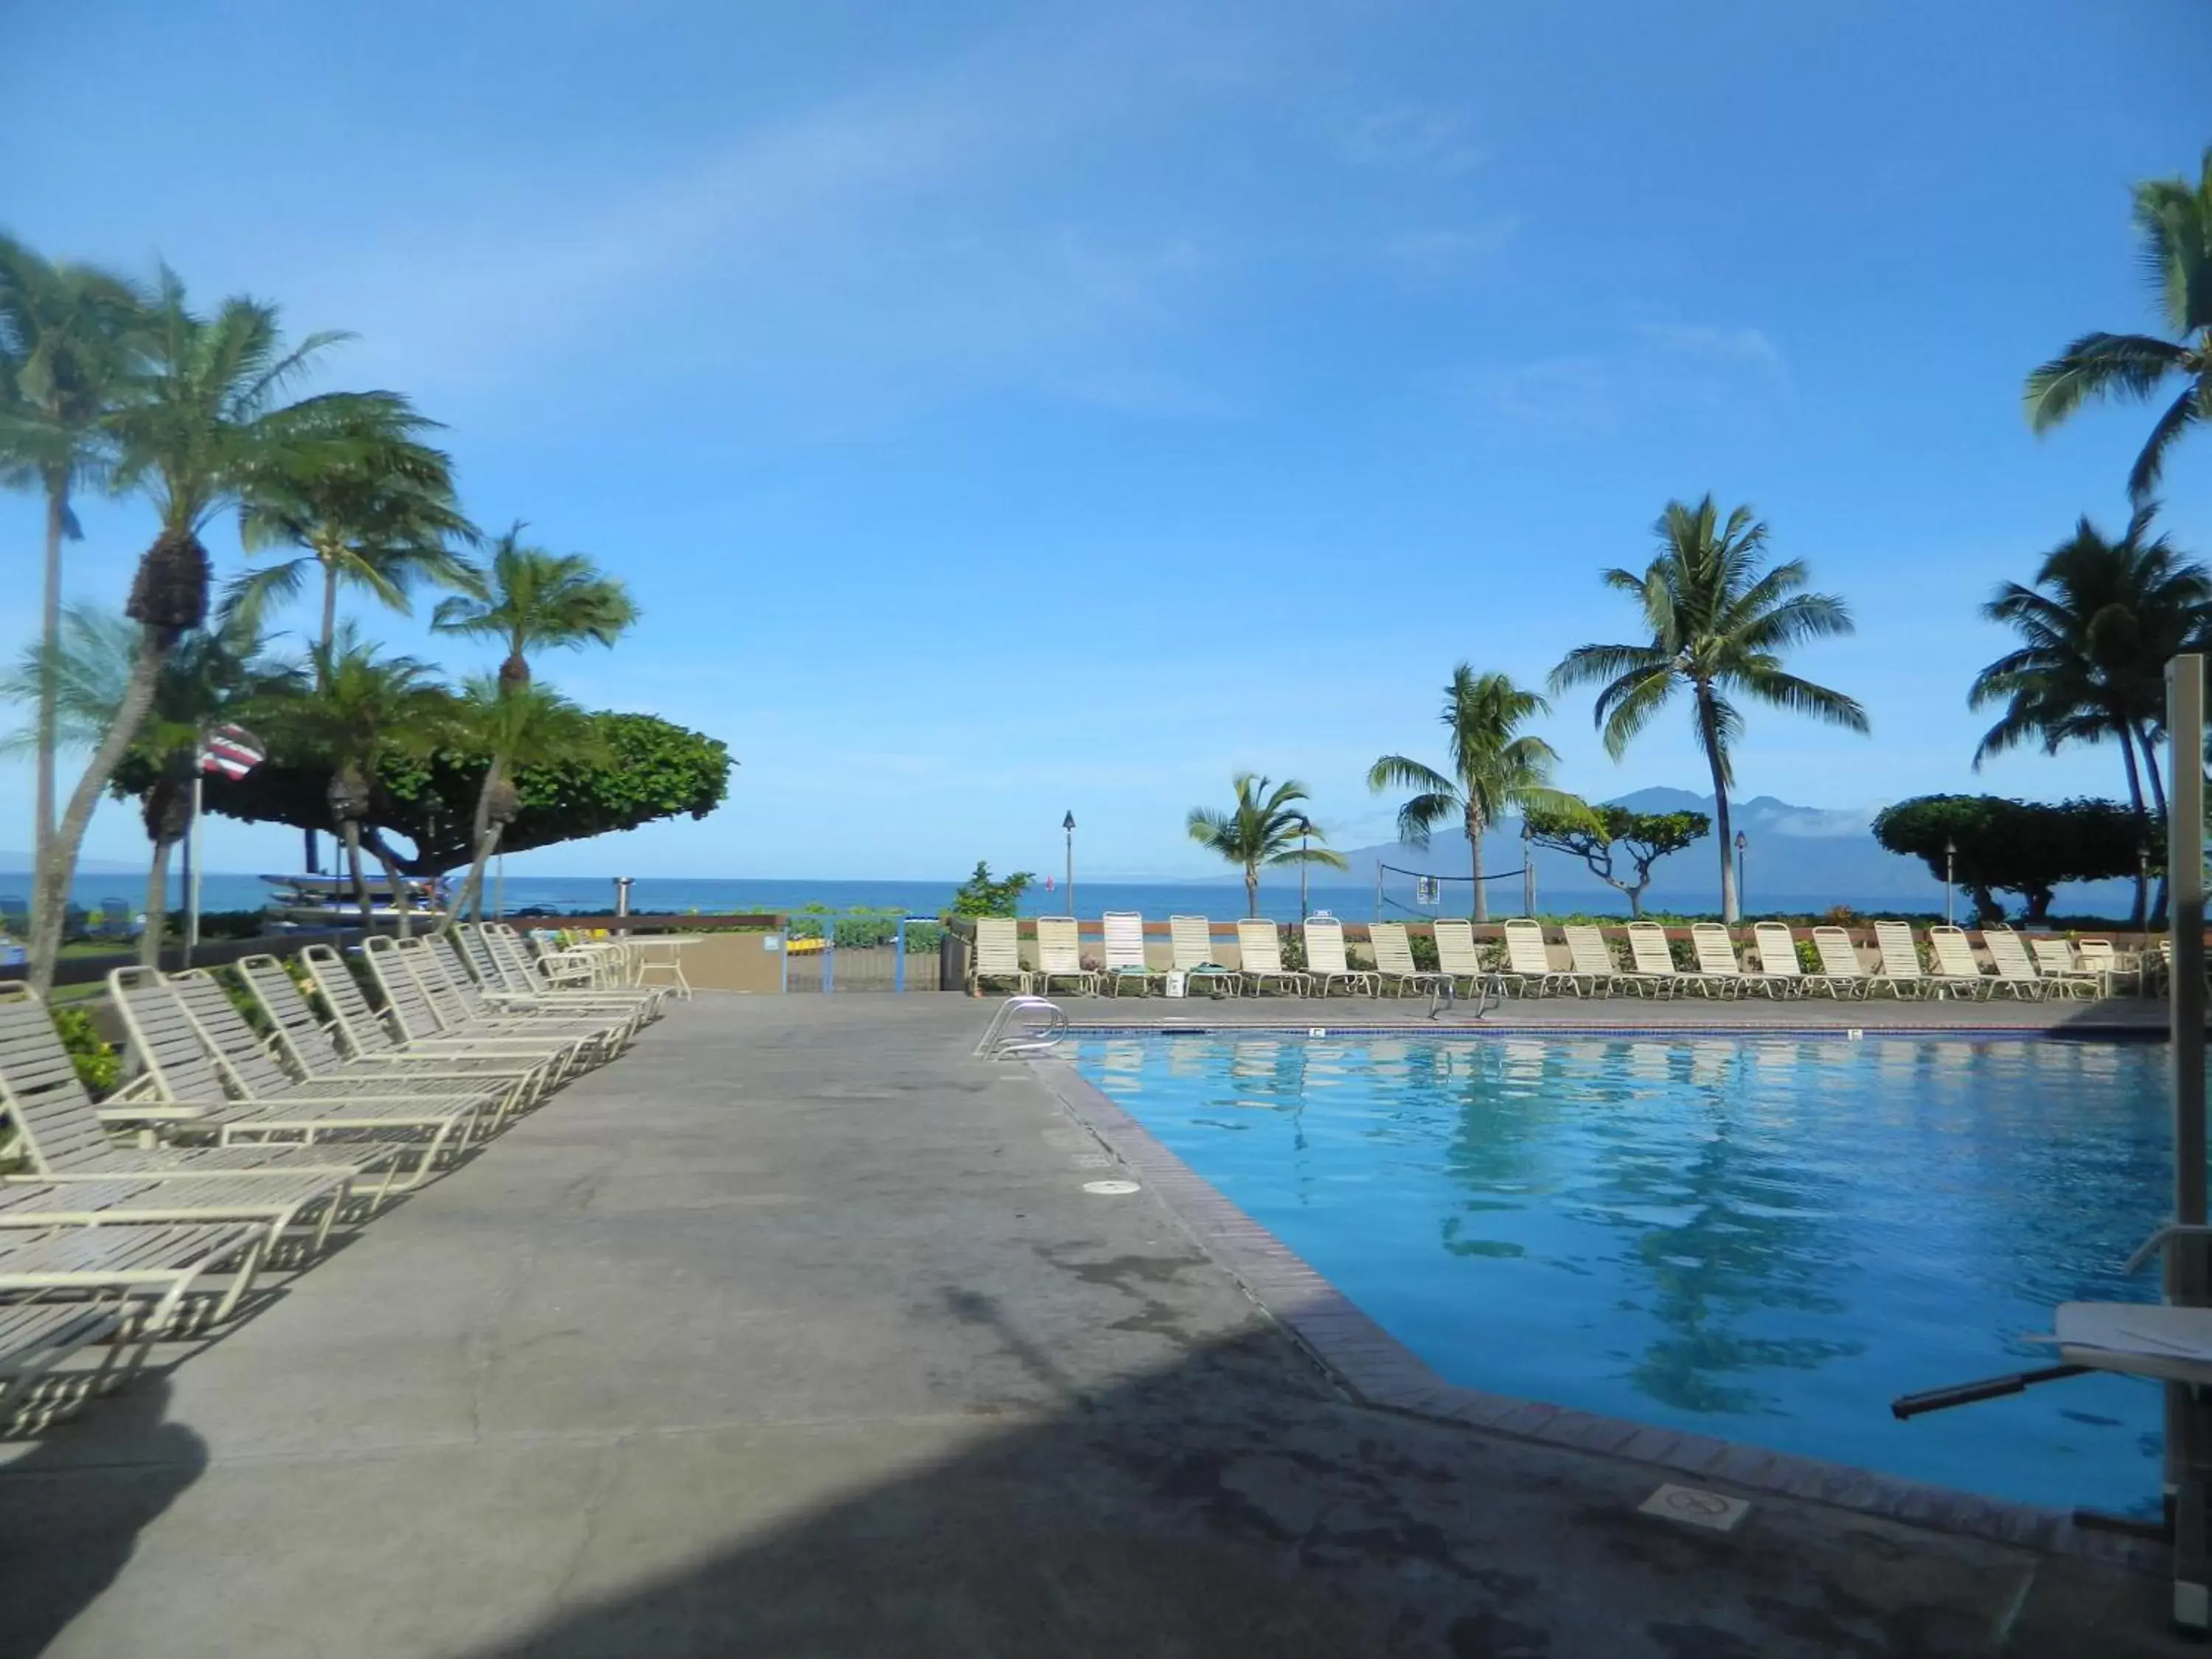 Day, Swimming Pool in Sands of Kahana Vacation Club